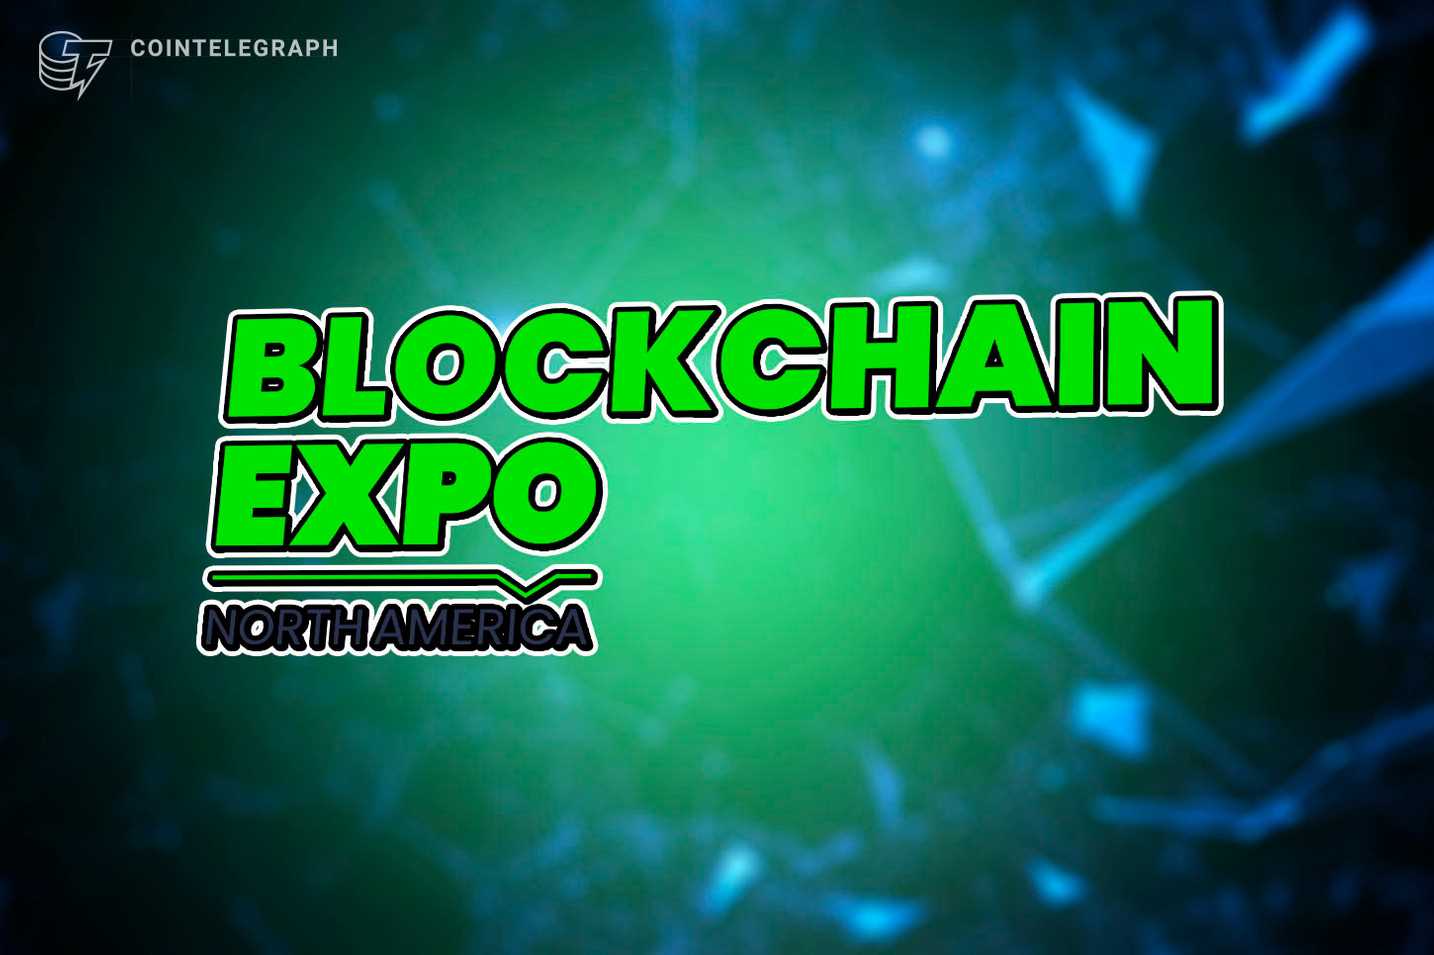 PayPal, Mars and 250 speakers to share knowledge at Blockchain Expo North America